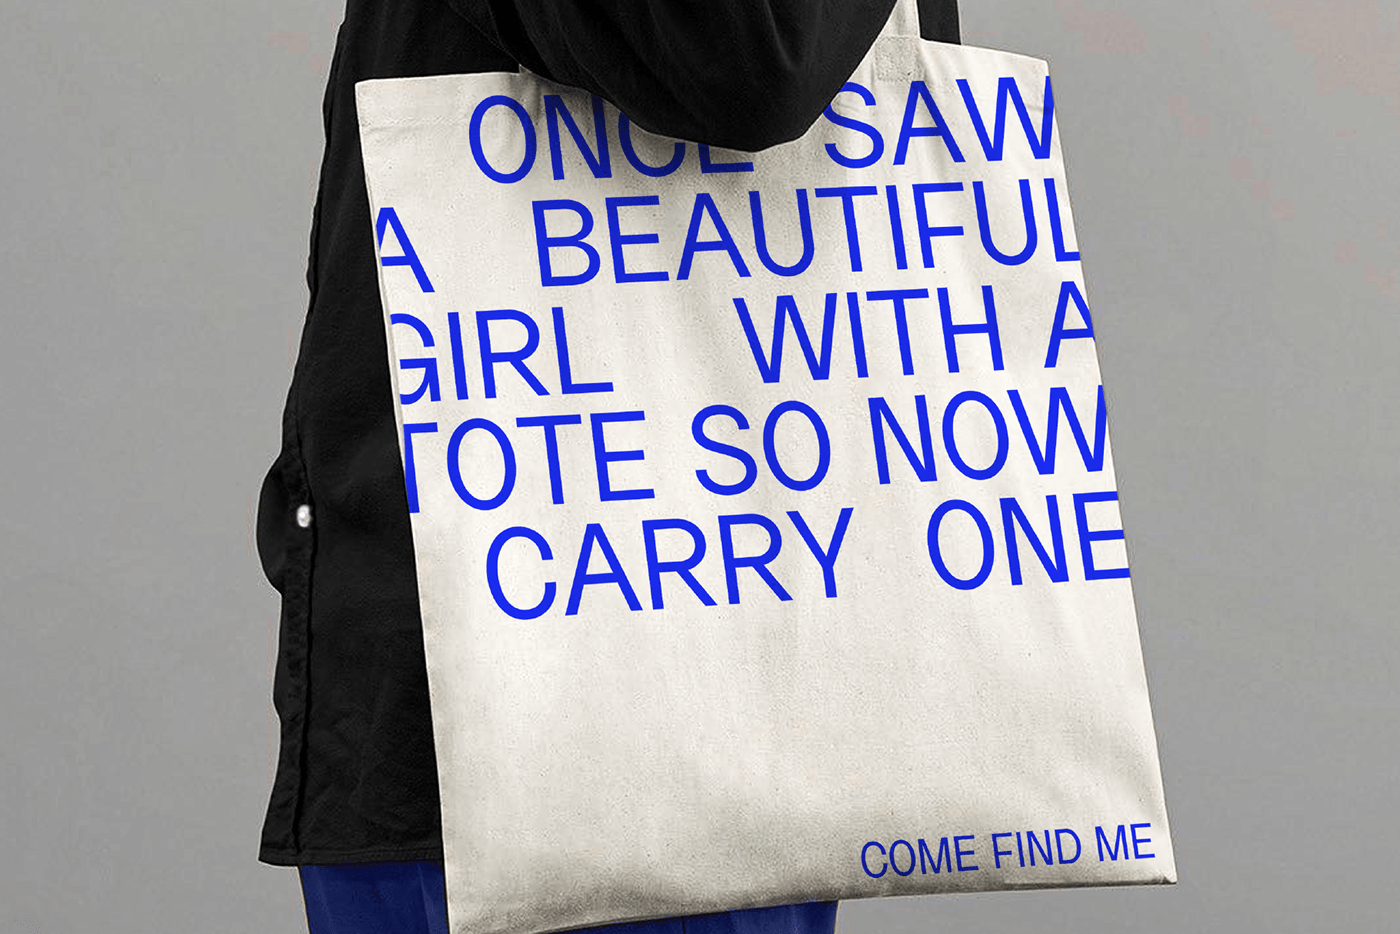 a tote bag that is secretly declaring love for a stranger